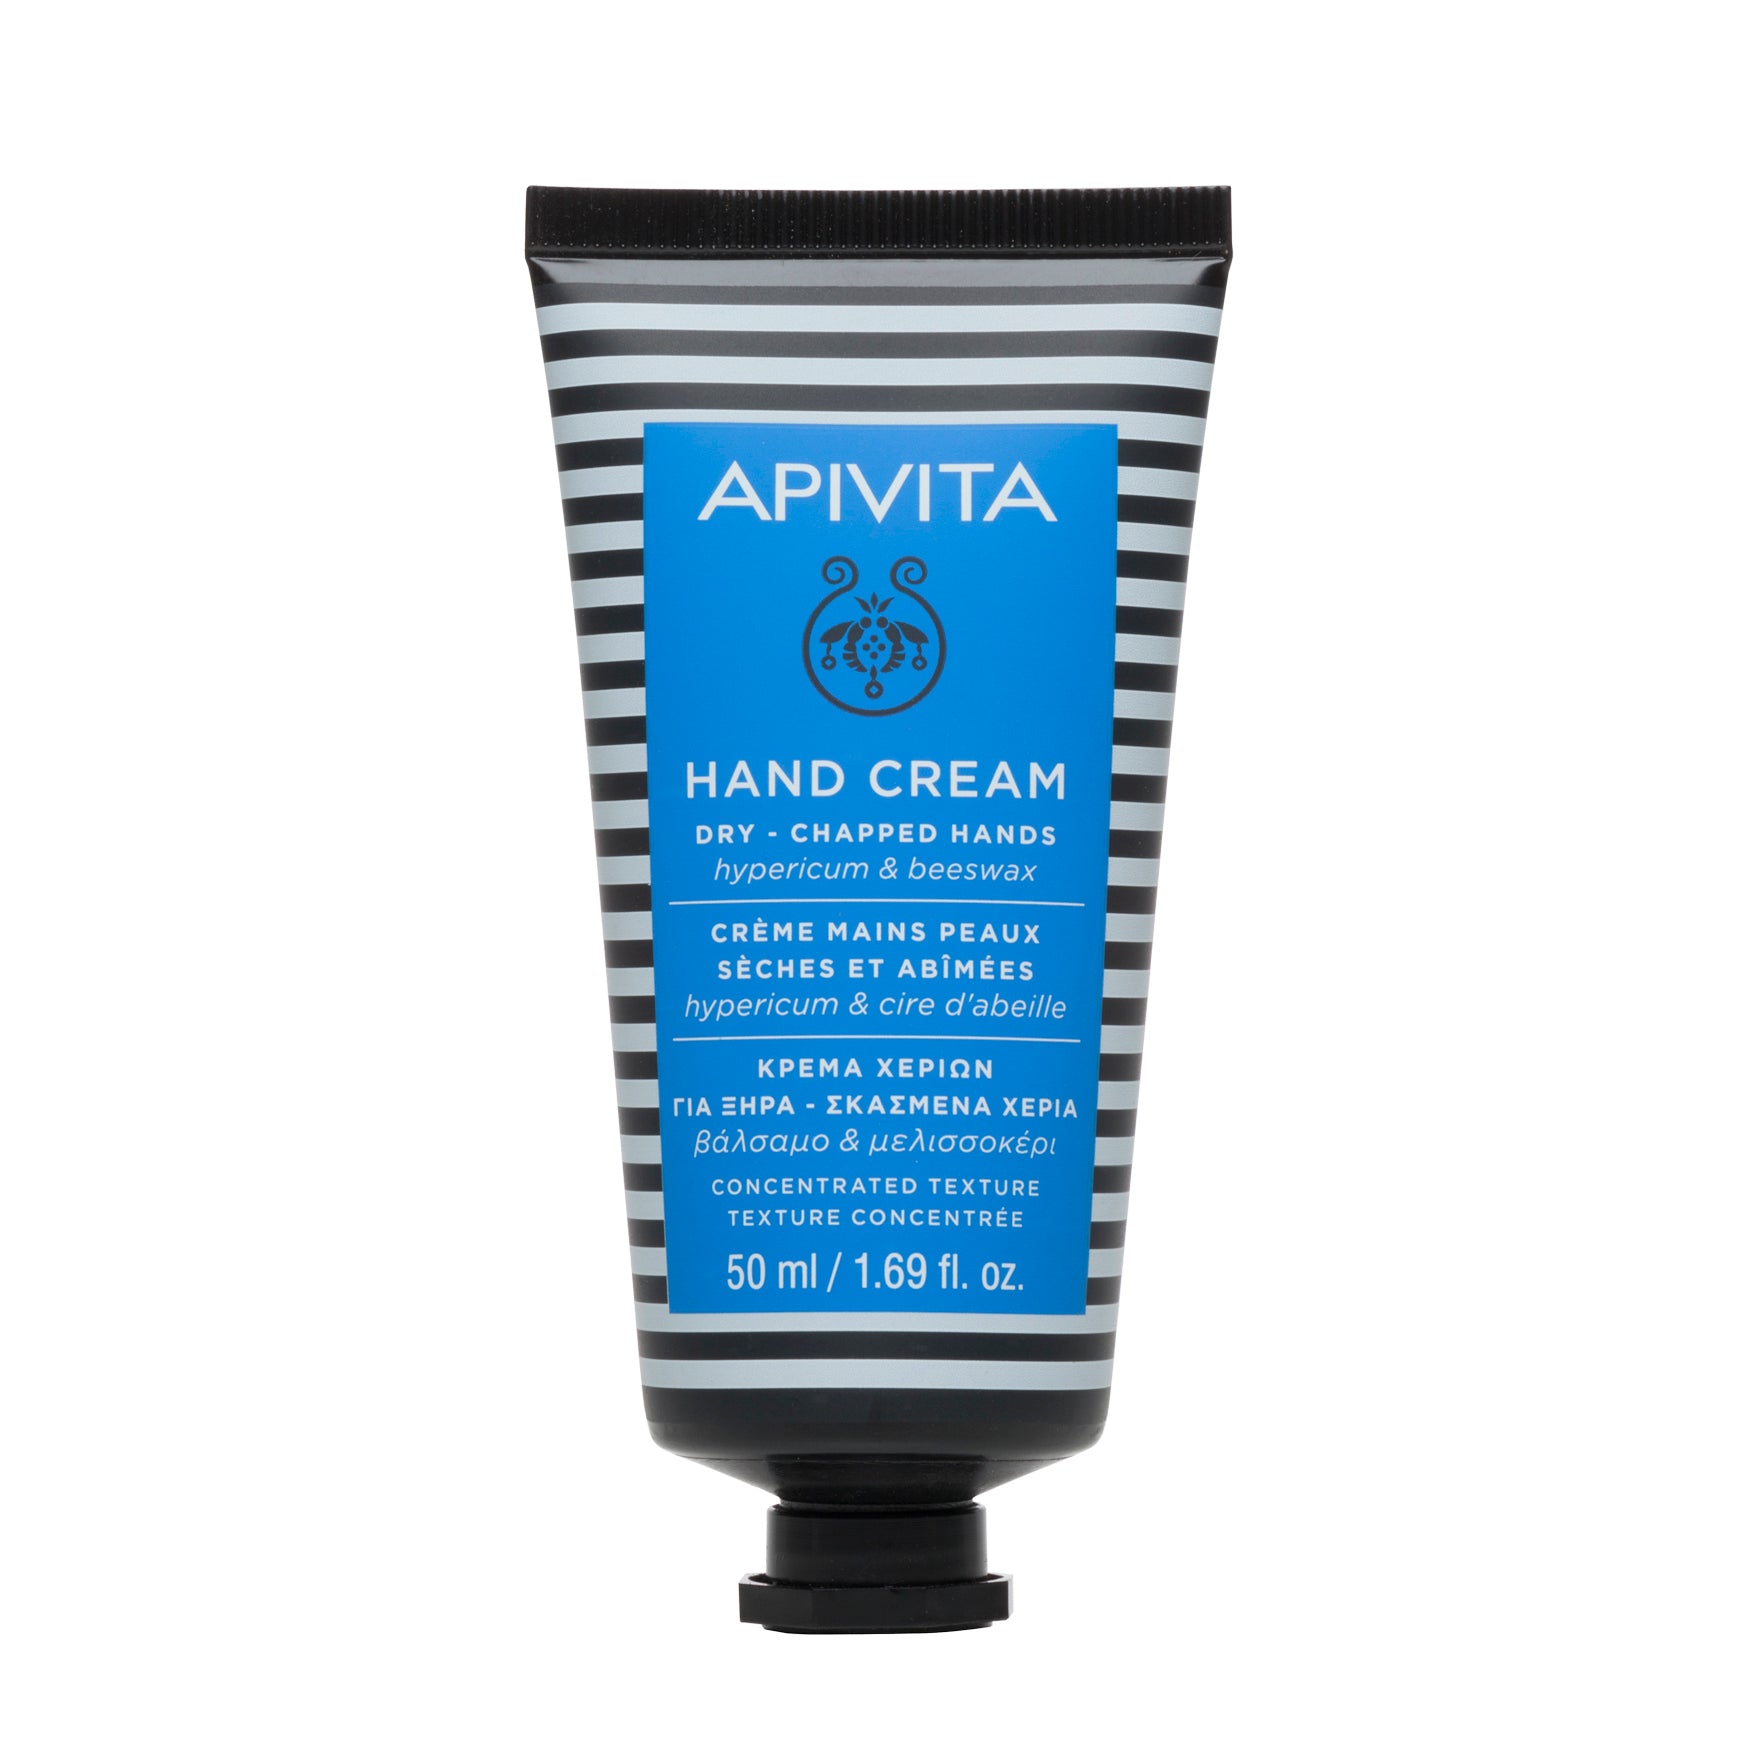 Apivita Hand Cream for Dry-Chapped Hands with Concentrated Texture